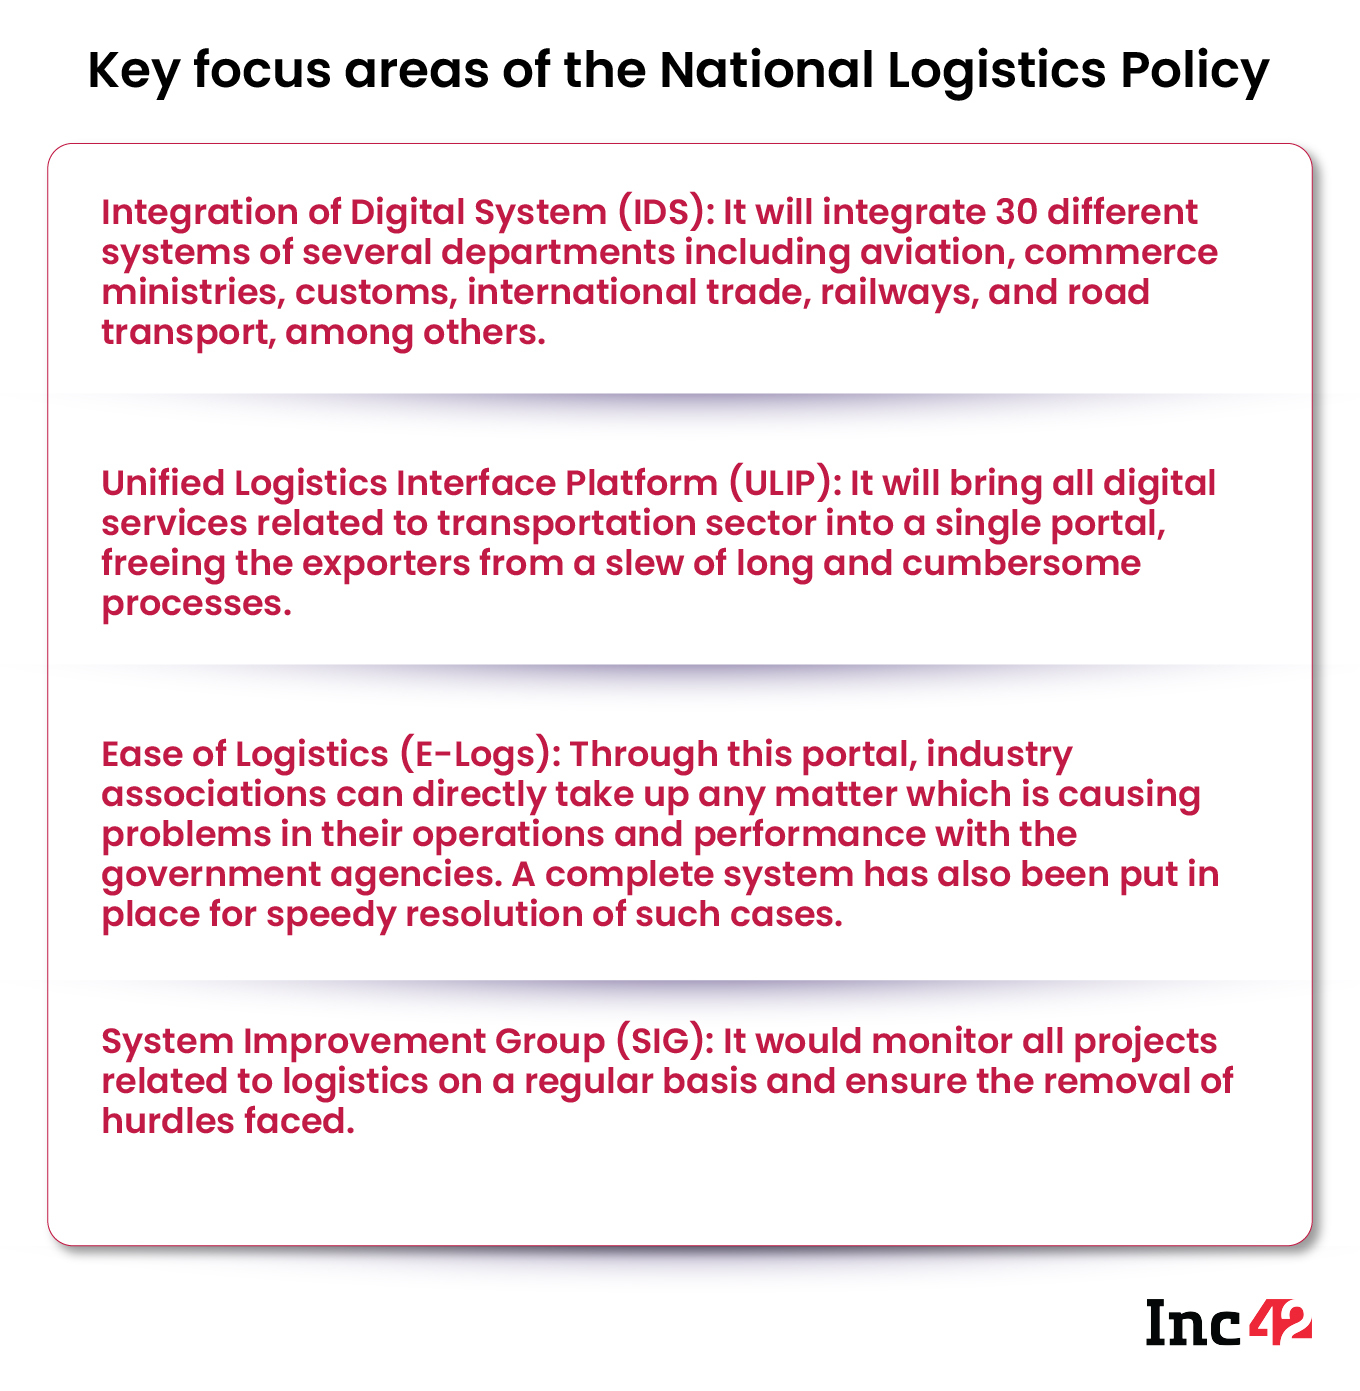 Key focus areas of the national logistics policy